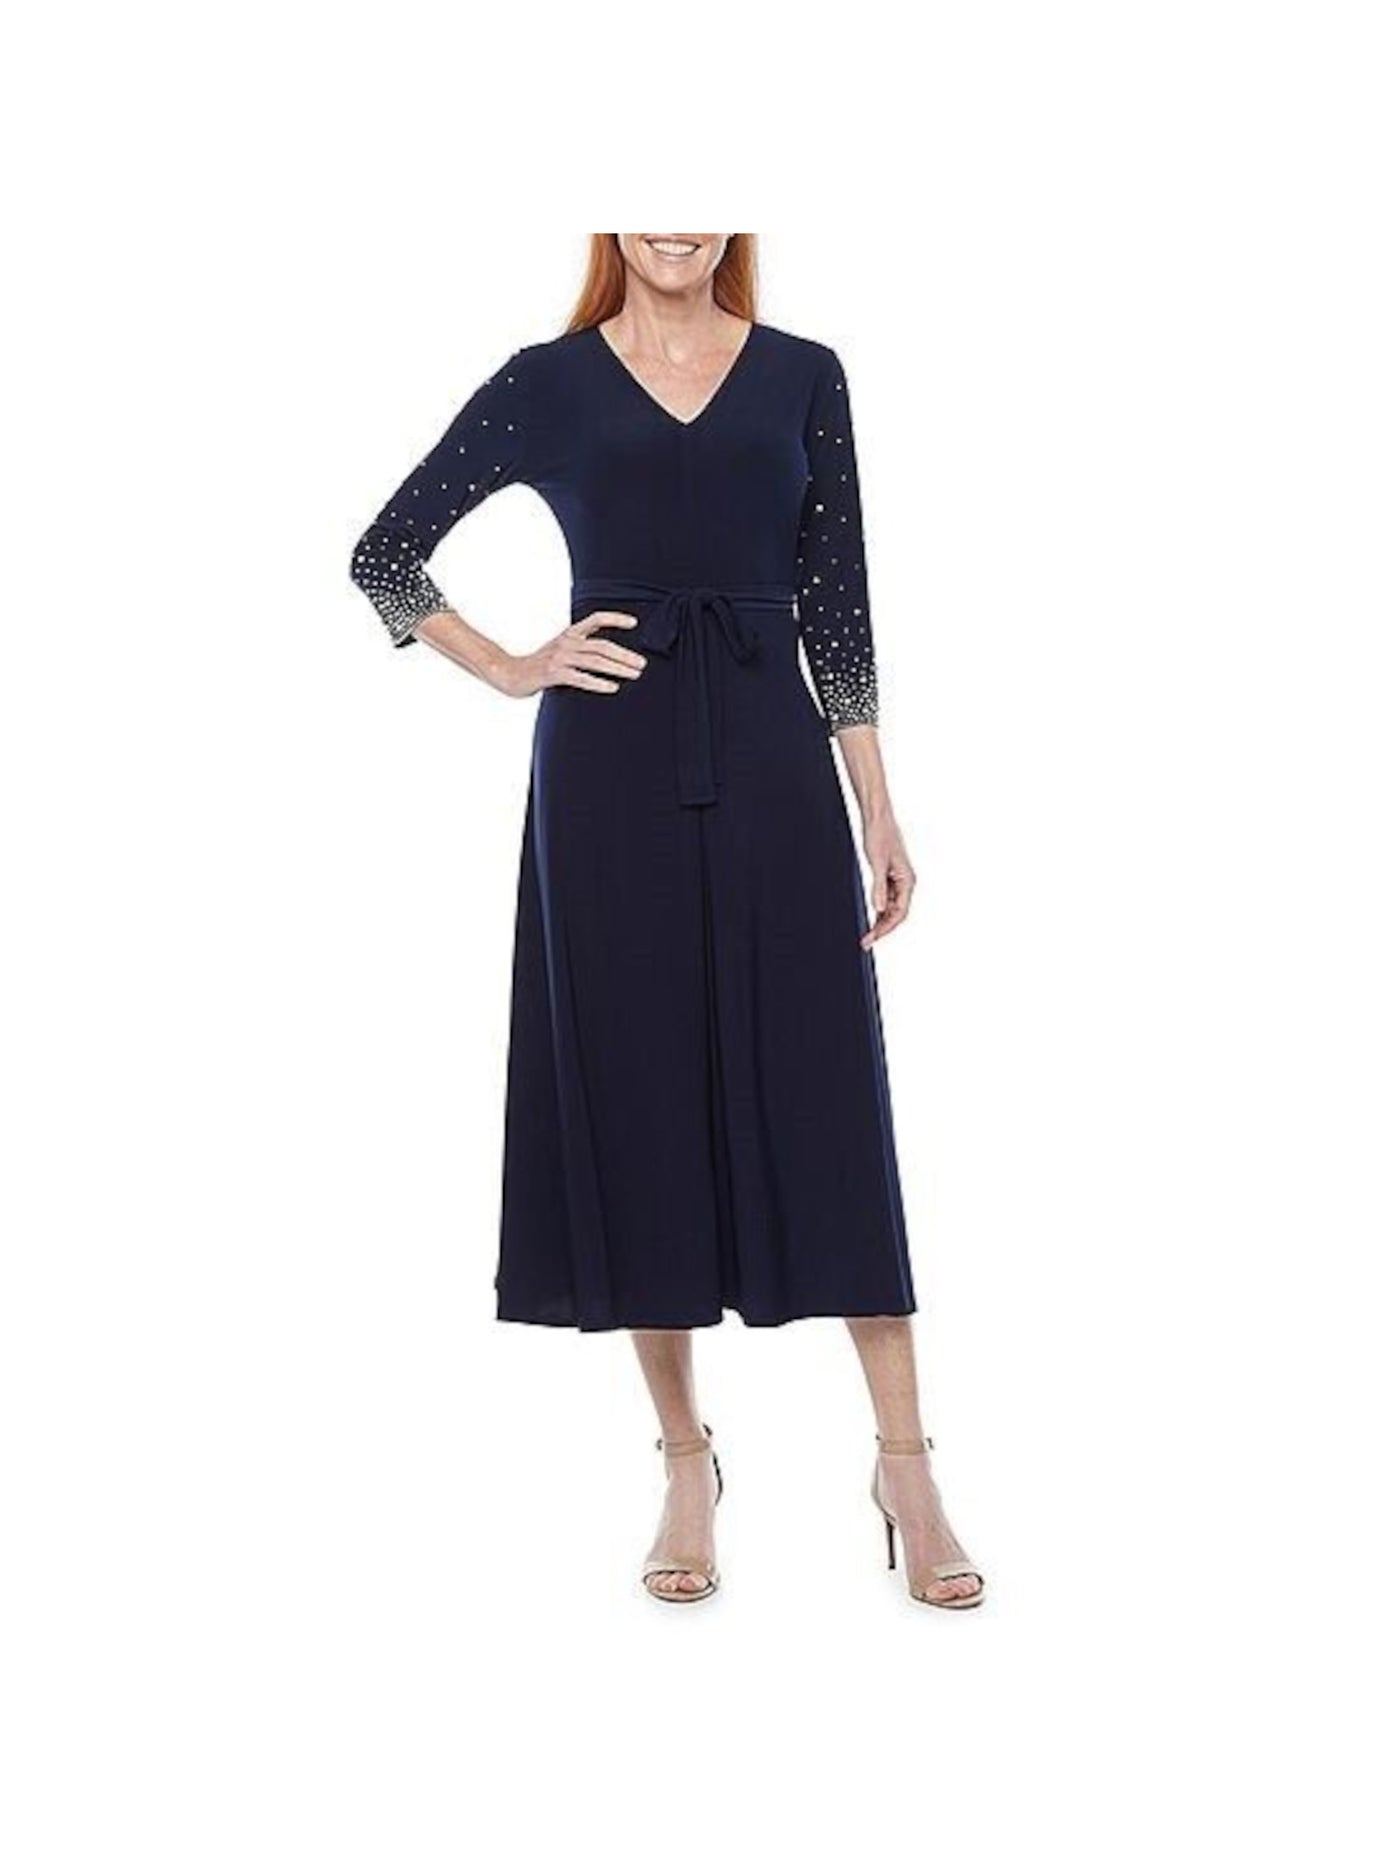 MSK Womens Navy Stretch Embellished Belted 3/4 Sleeve V Neck Midi Party Fit + Flare Dress Petites PS